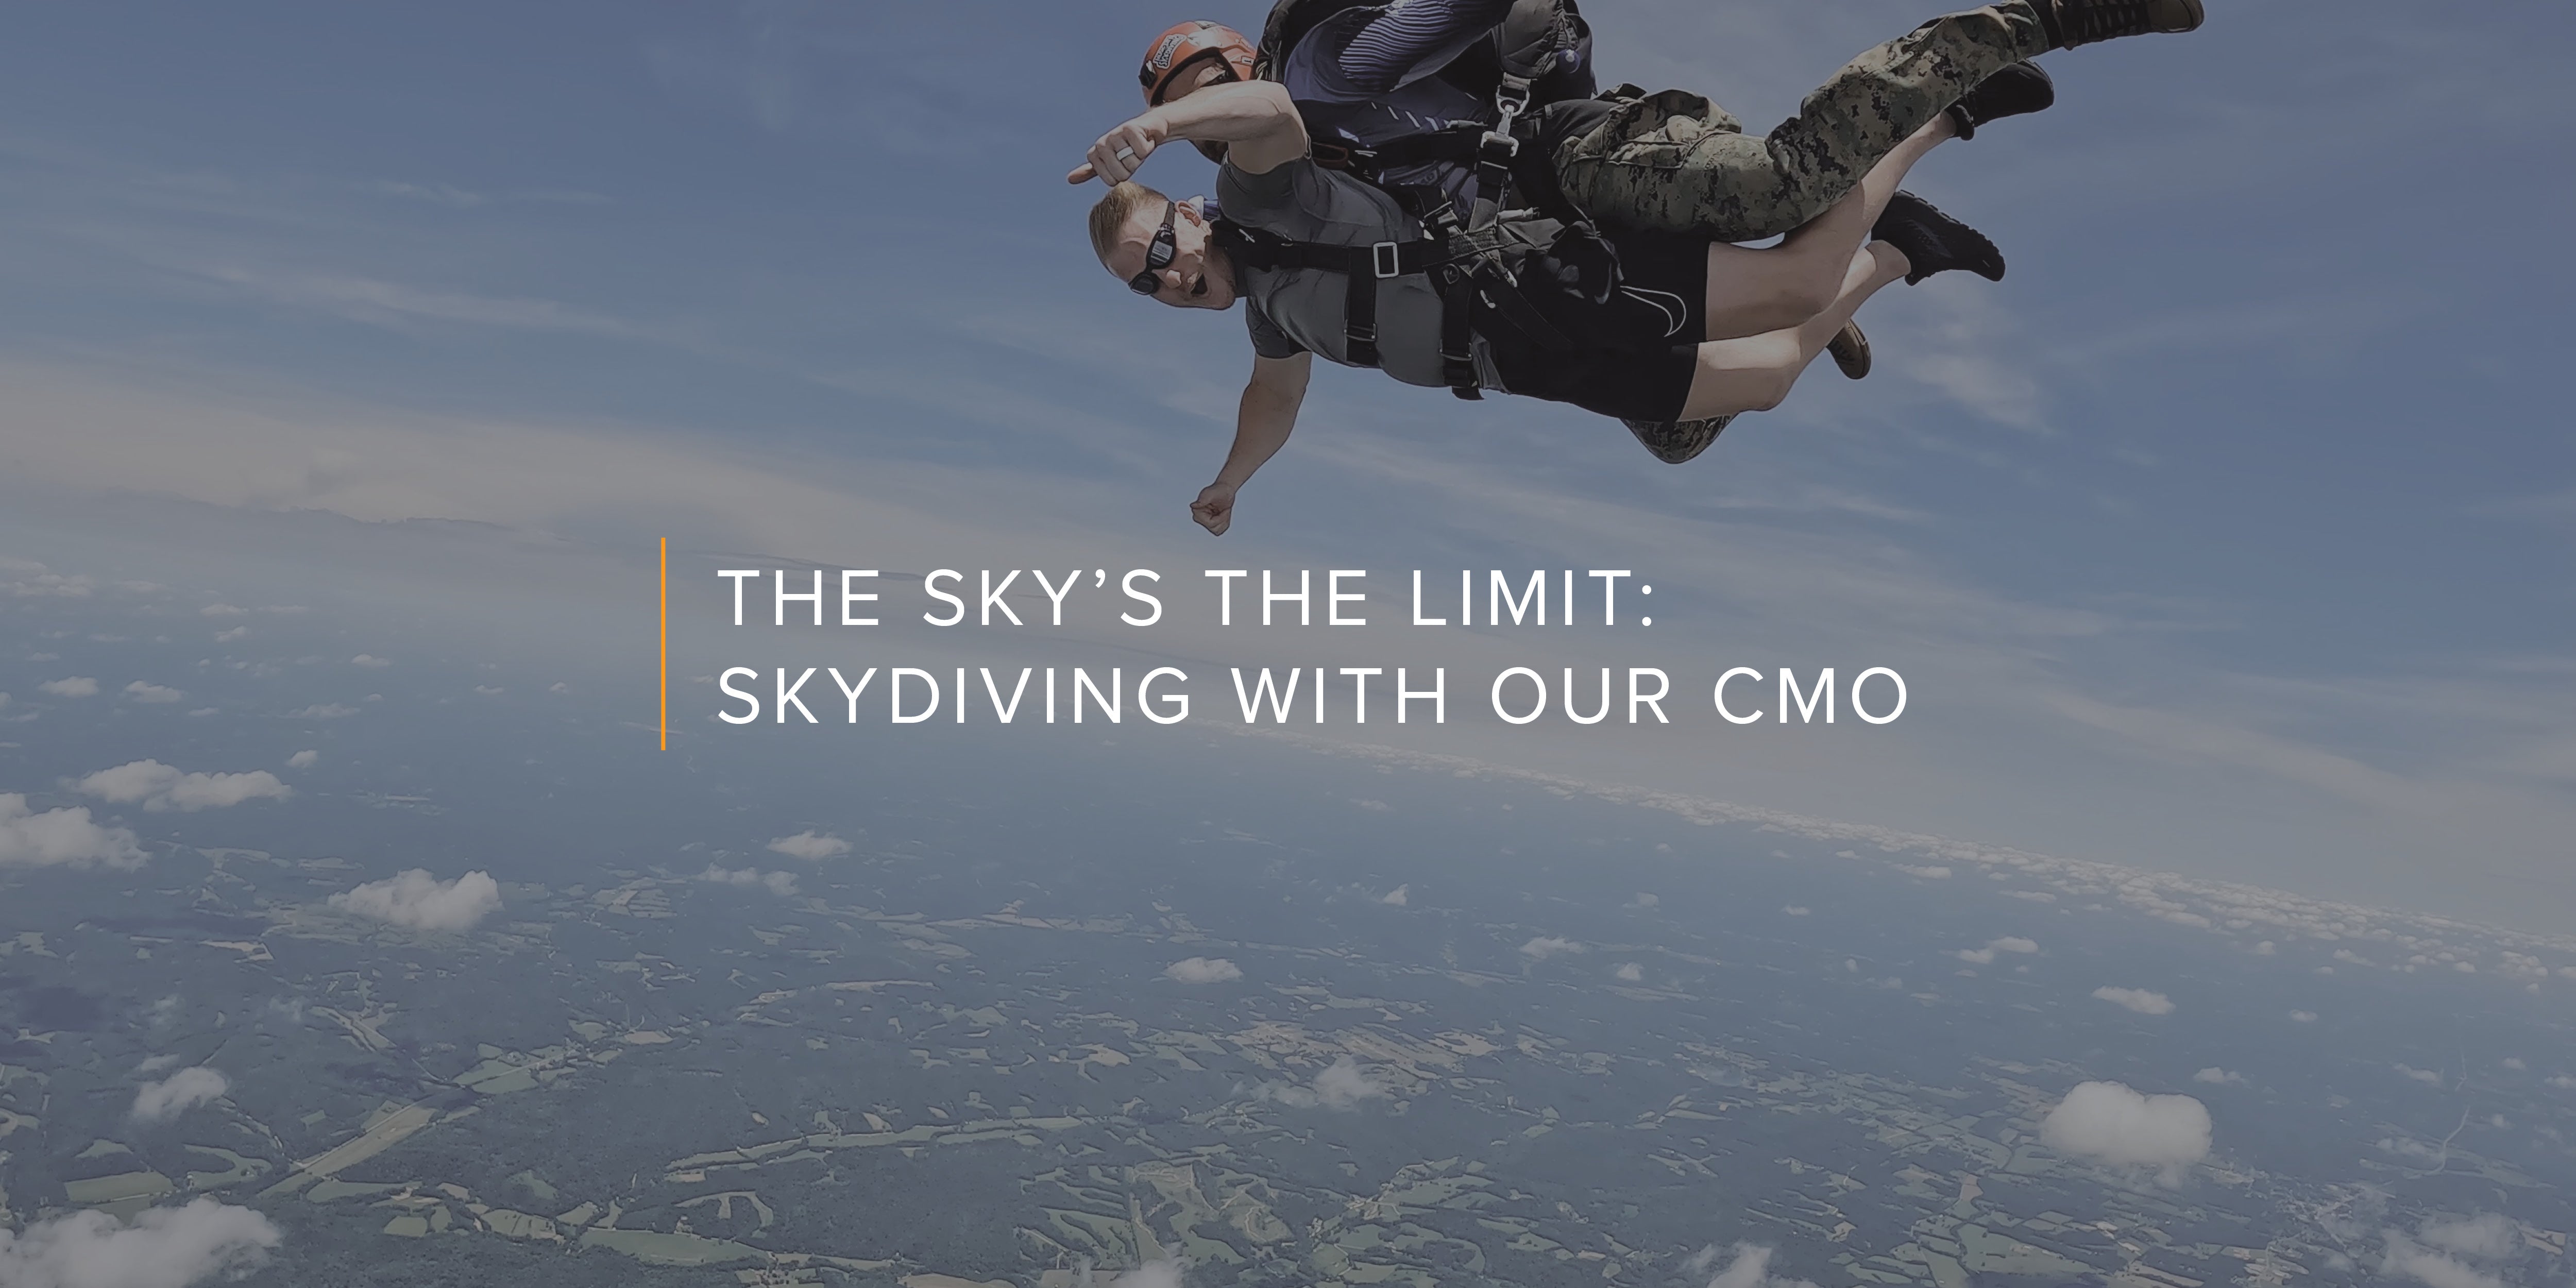 The Sky's The Limit: Skydiving With Our CMO